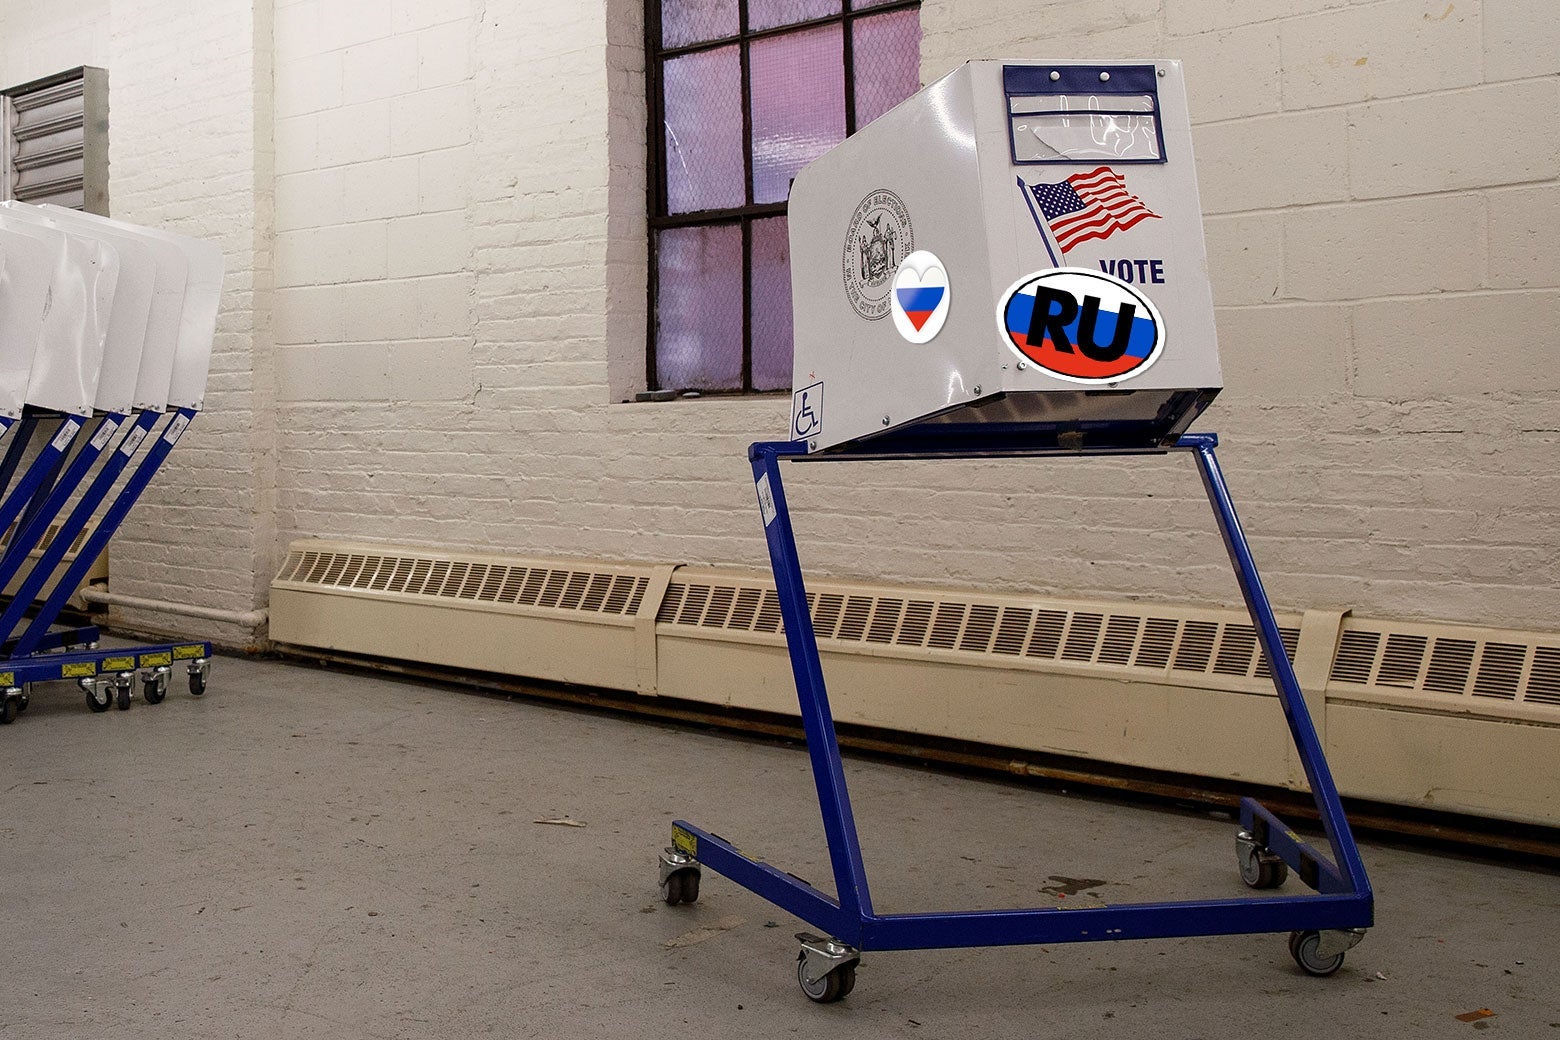 Photo illustration: Voting booths sit at a New York City Board of Elections voting machine facility warehouse on Nov. 3, 2016, in the Bronx borough of New York City. The machine has added Russian stickers on it.